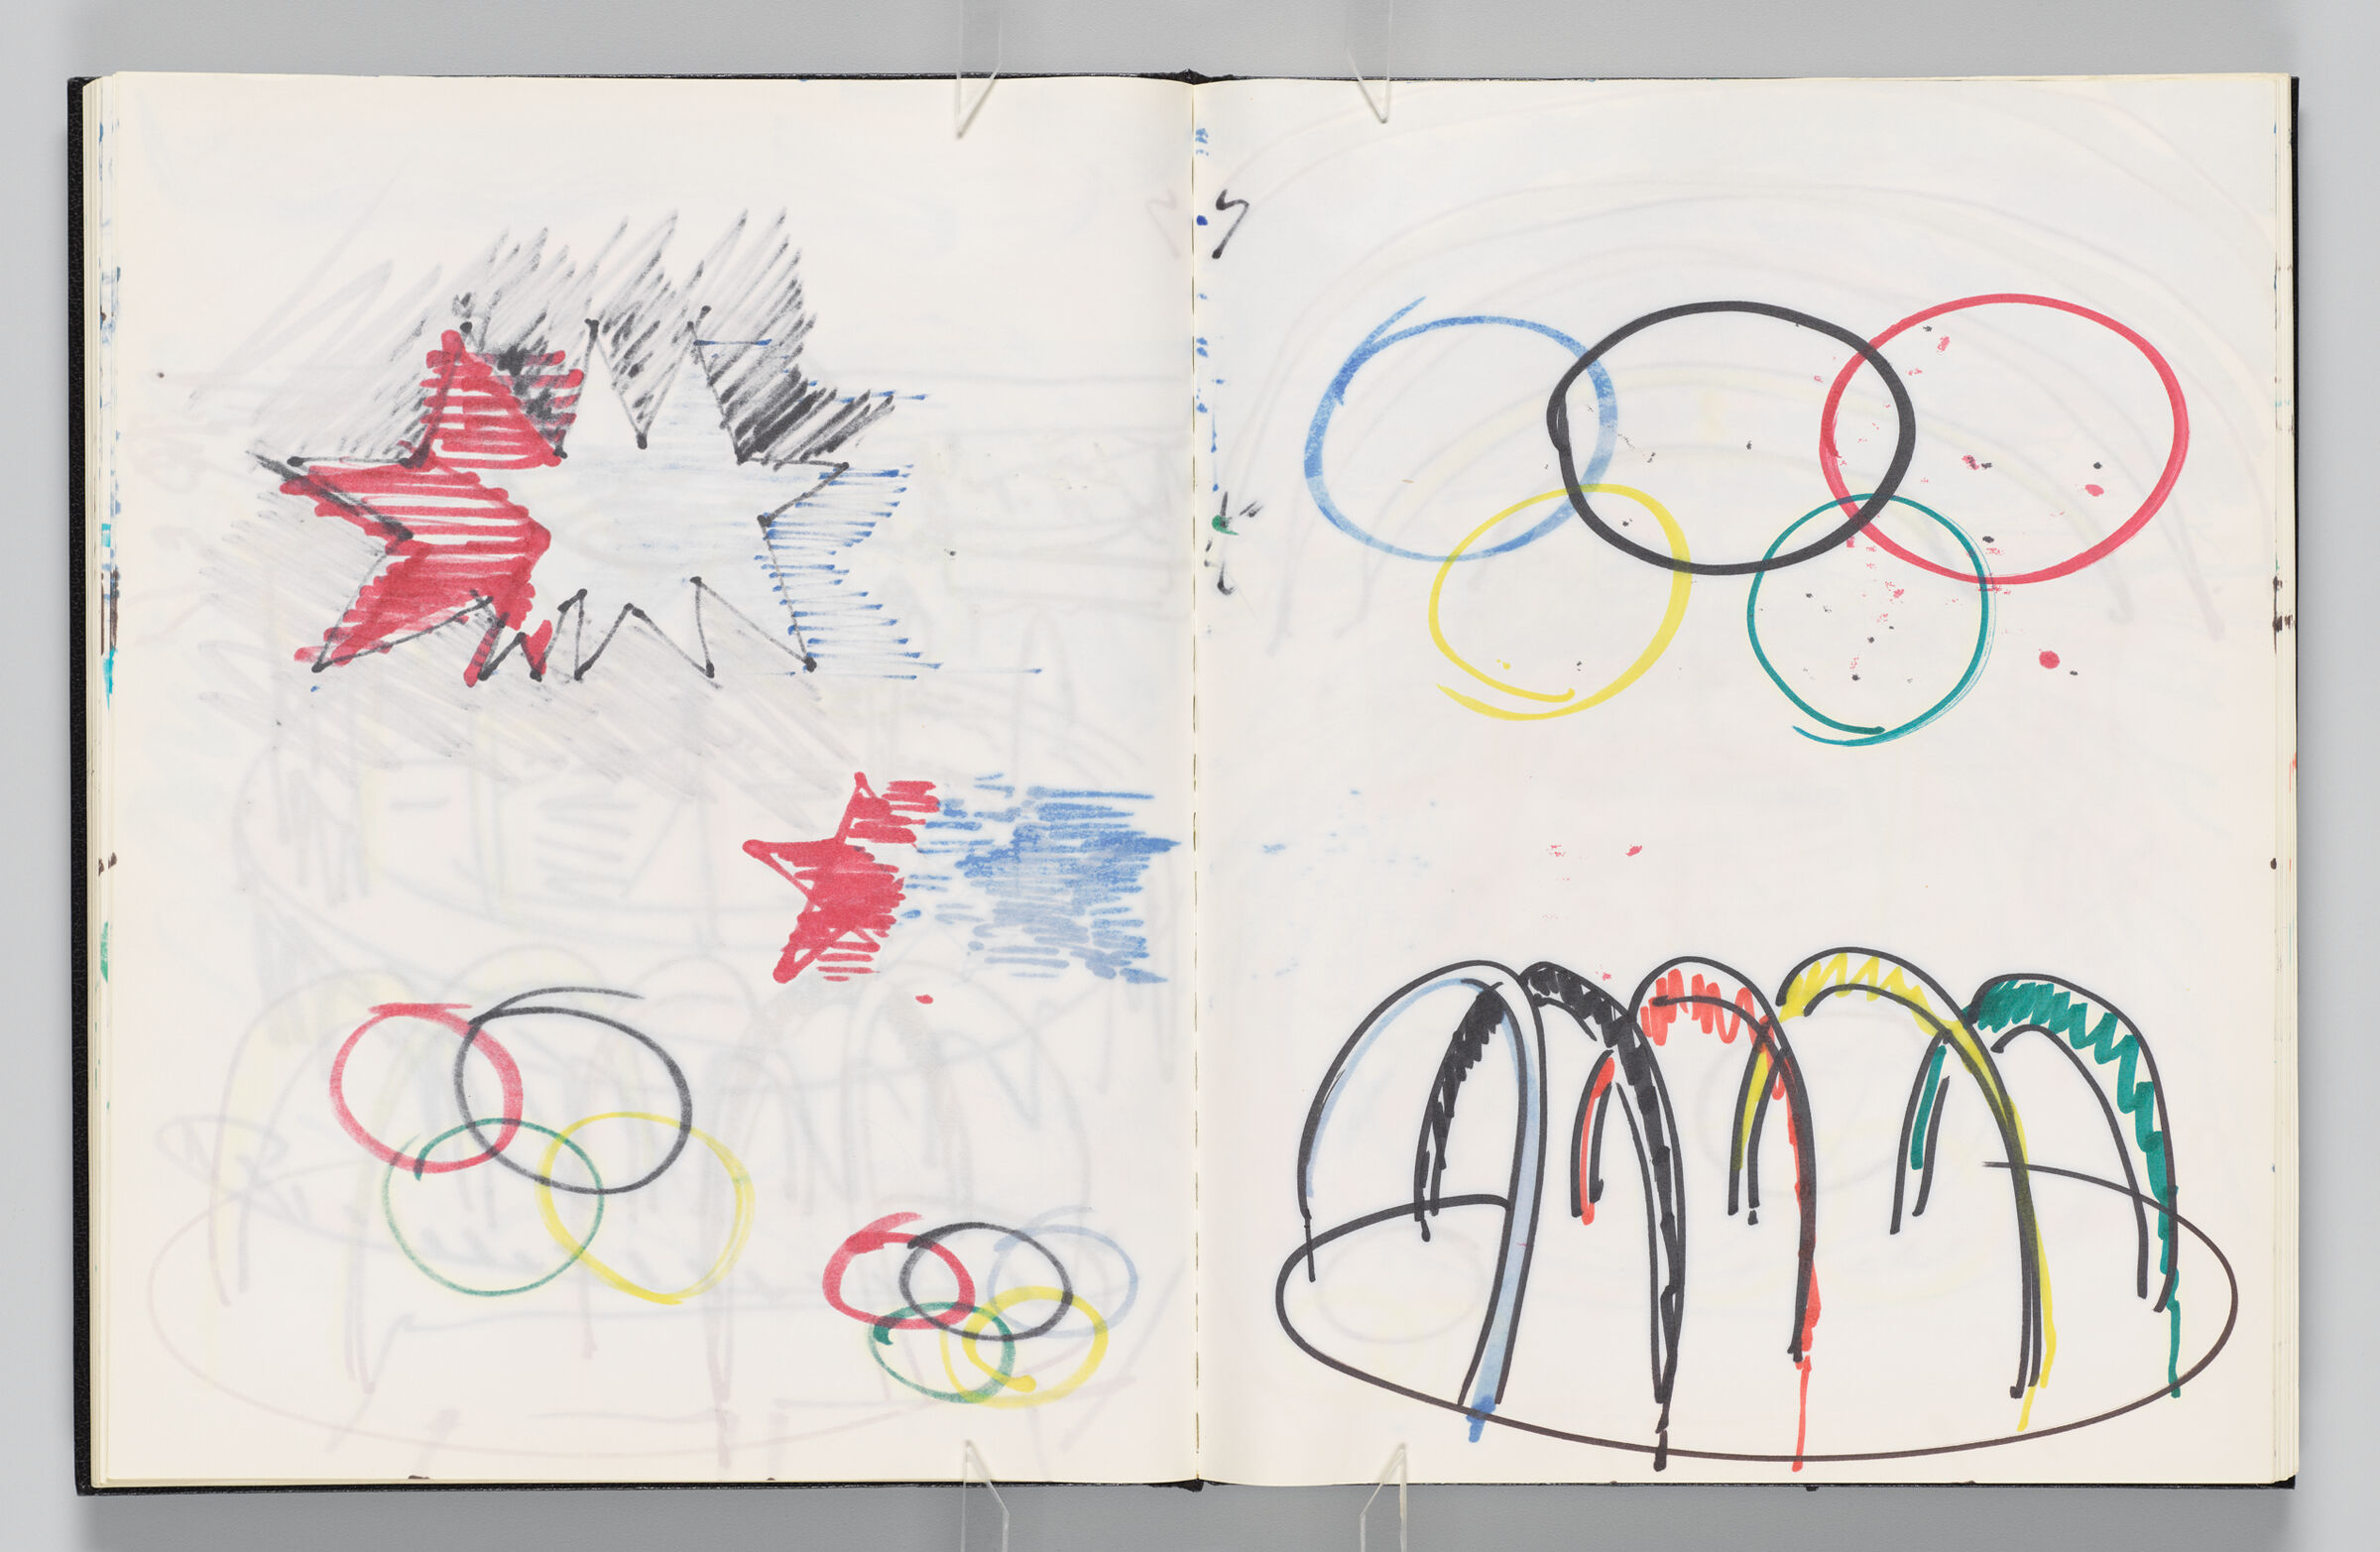 Untitled (Bleed-Through Of Previous Page, Left Page); Untitled (Olympic Rings And Rainbows Over L.a. Memorial Coliseum, Right Page)